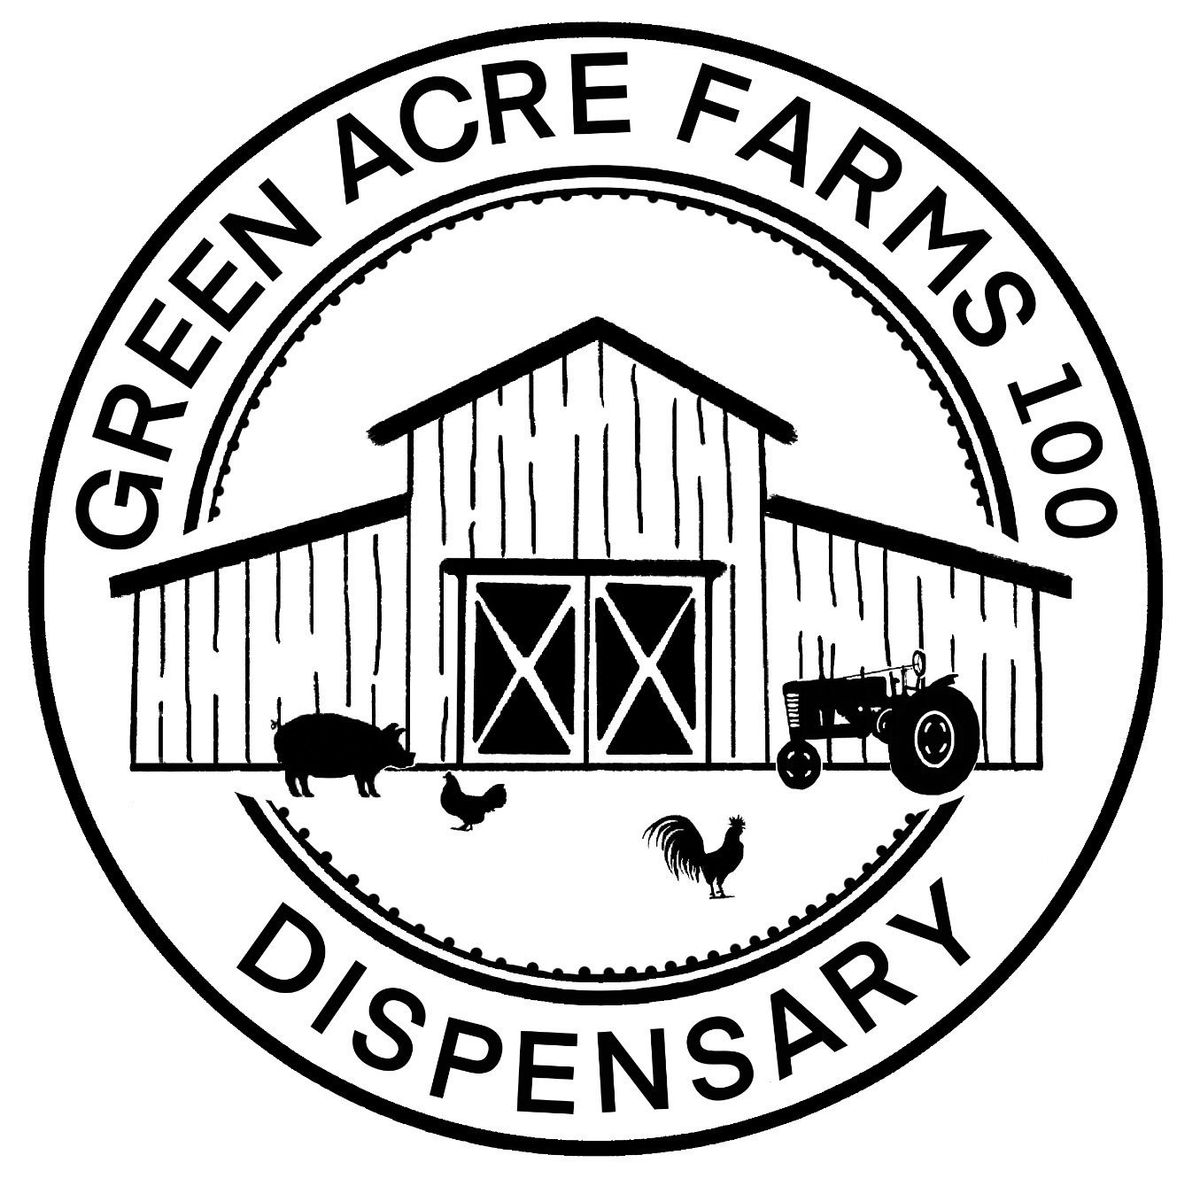 Independence Day Celebration at Green Acre Farms